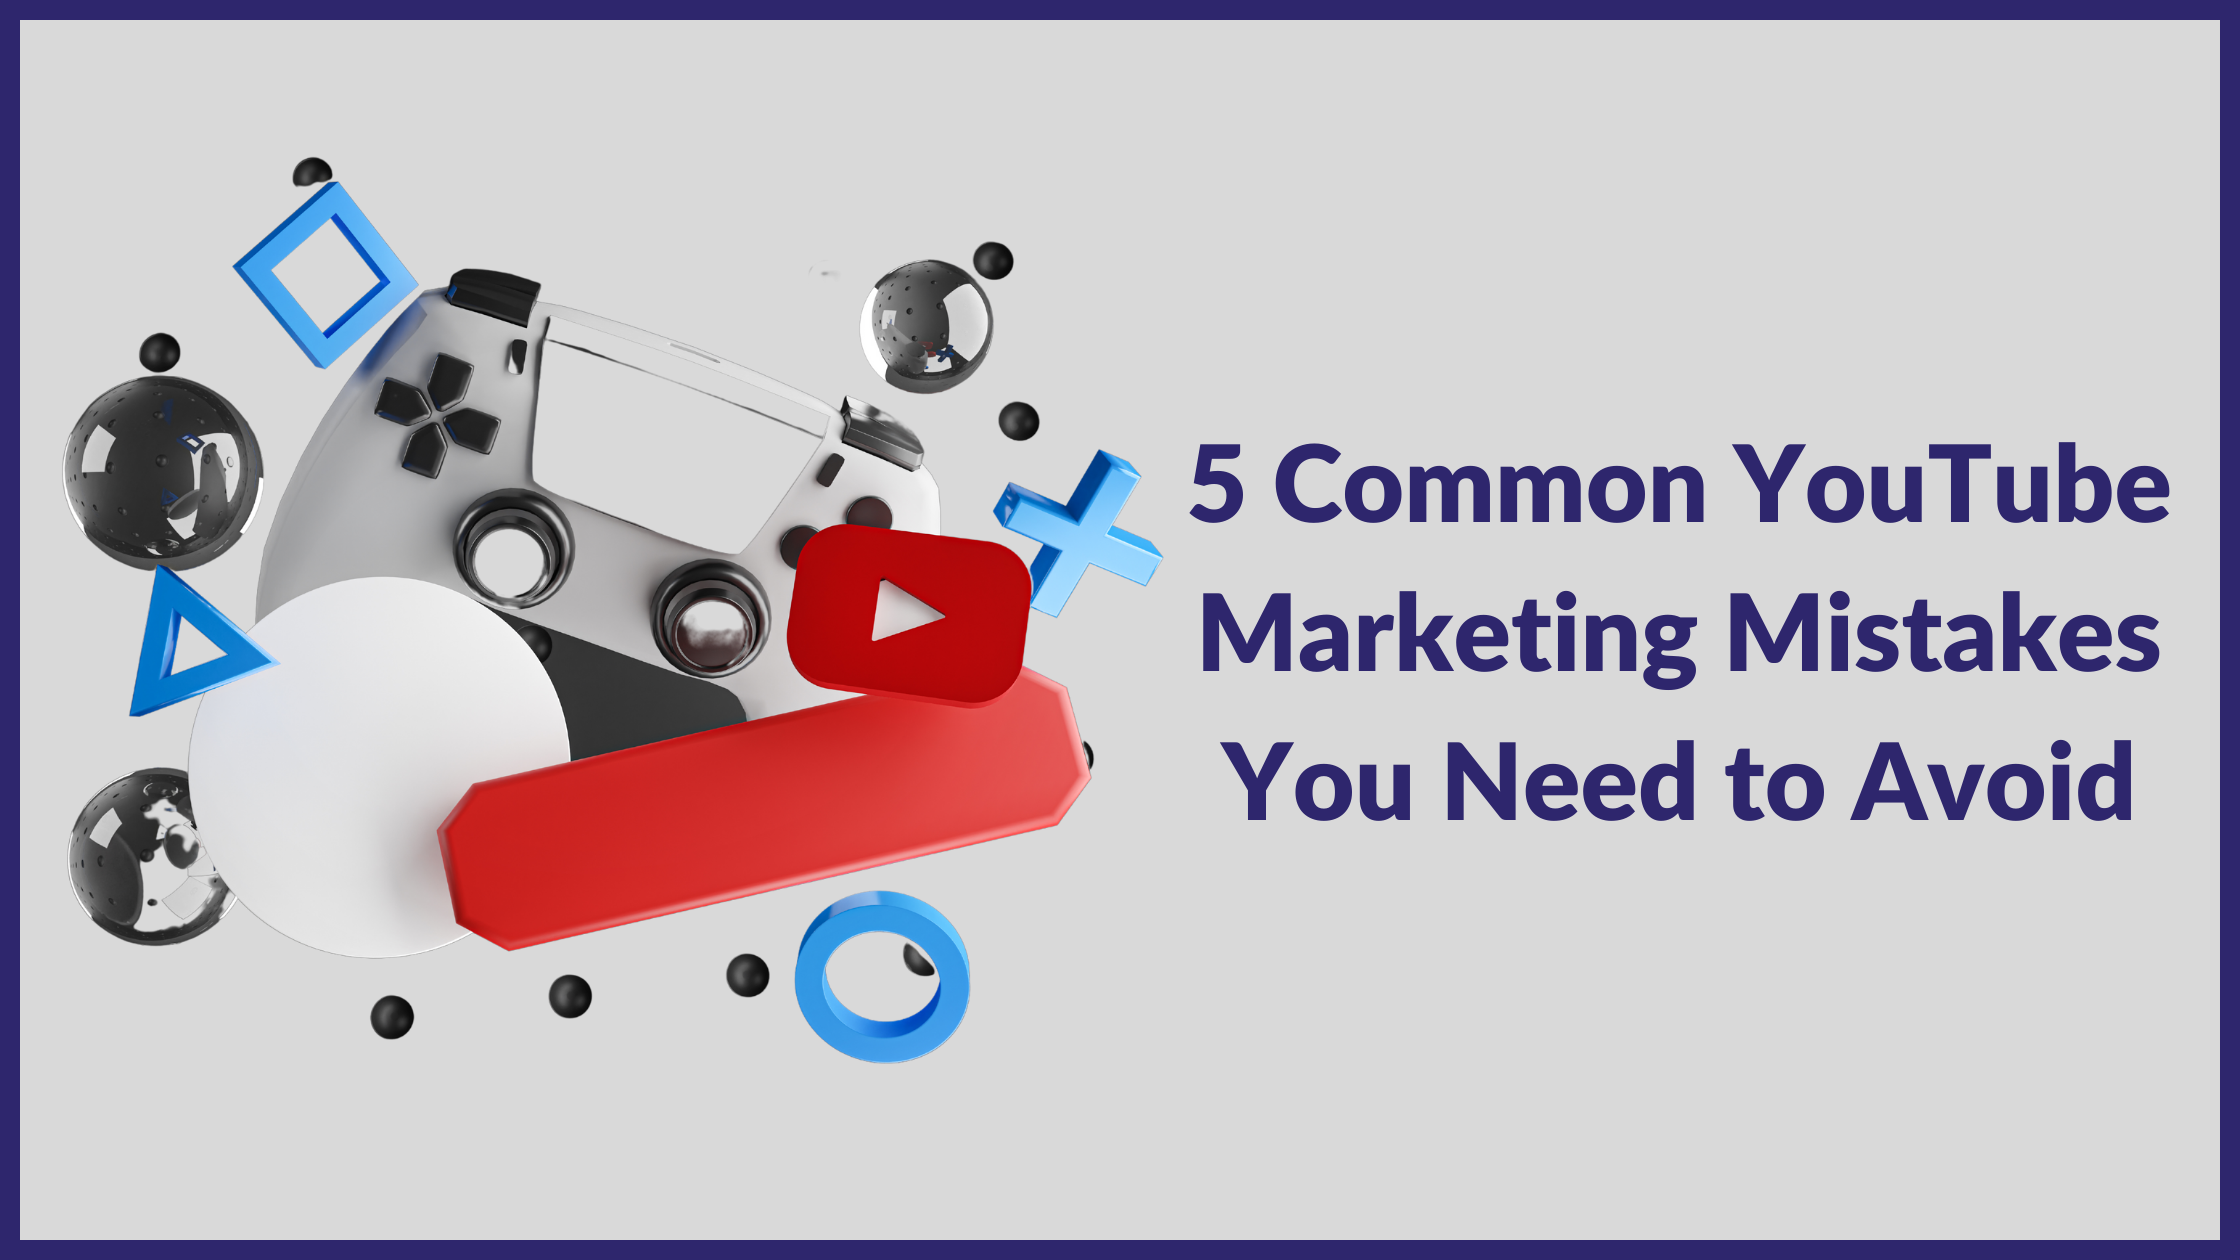 5 Common Marketing Blunders You Should Avoid